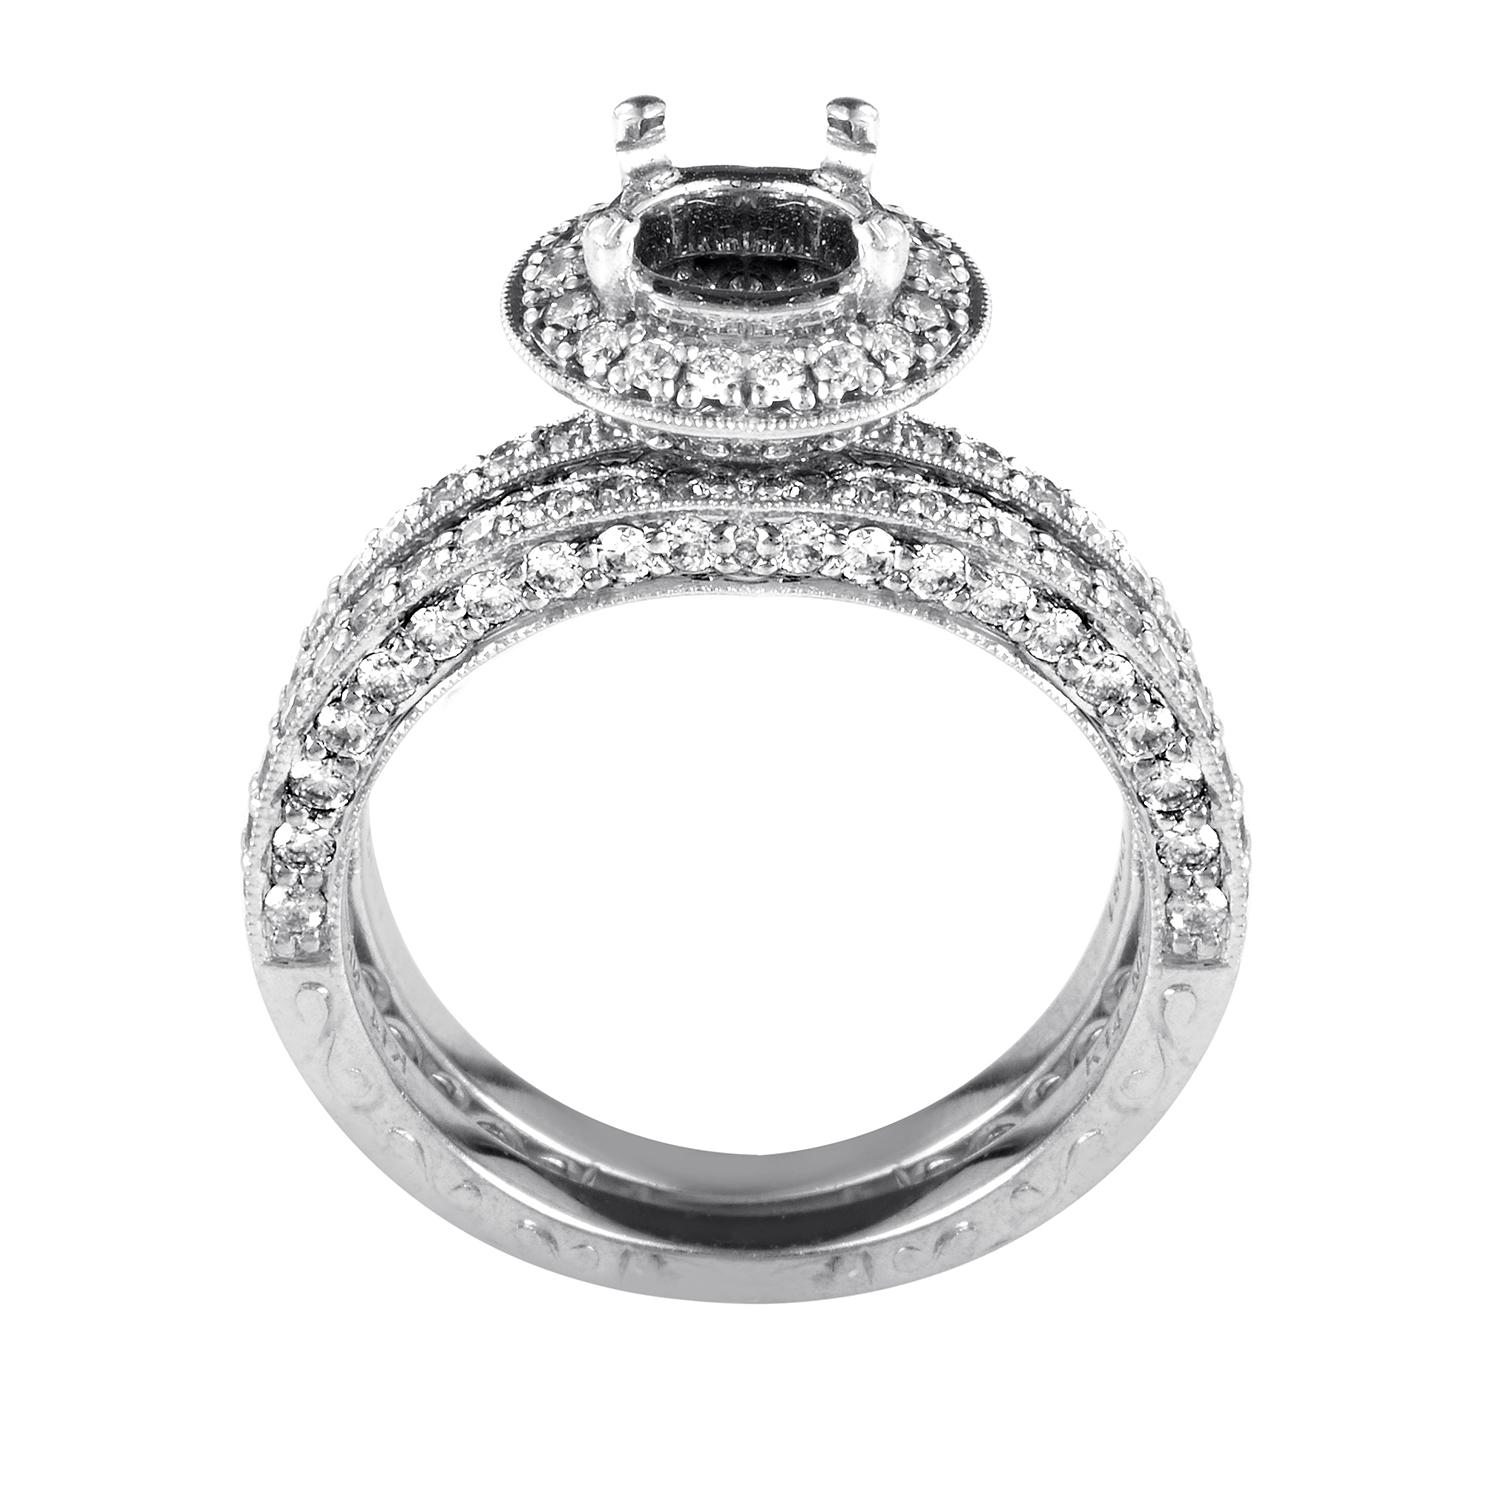 A heavenly semi mount bridal set by Natalie K in 14K white gold dazzles with pave set diamonds along the front and sides, as well as along the halo that surrounds the 4 prong center setting, totaling 1.37ct. Both bands measure 4mm when laying flush